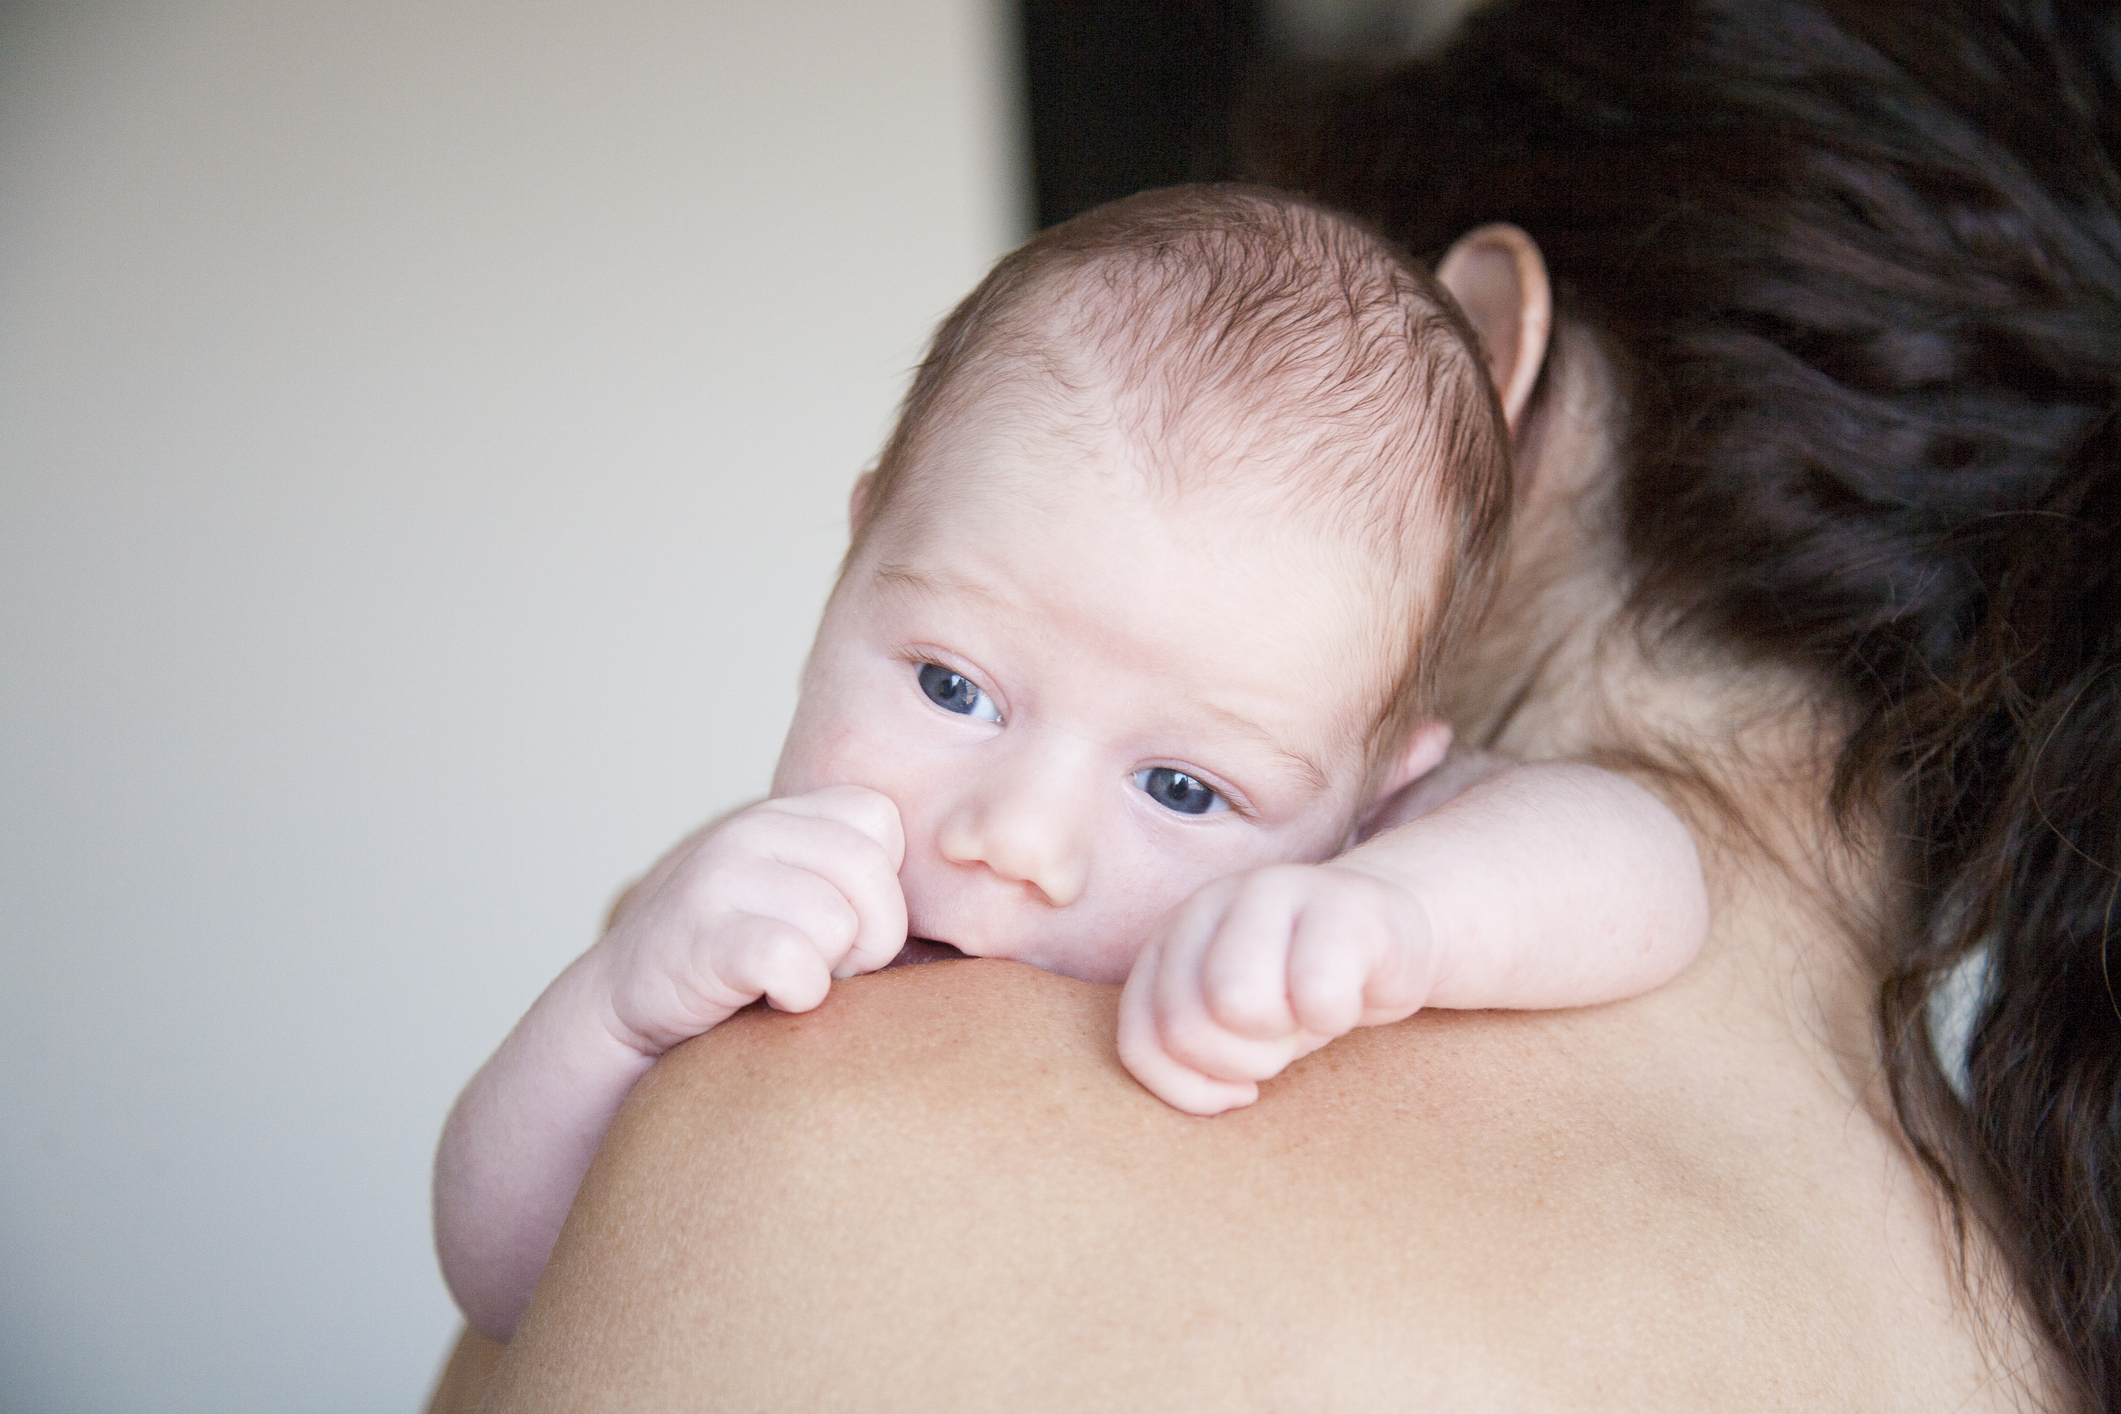 A young baby in only a diaper being held over another person's shoulder, which is bare. 